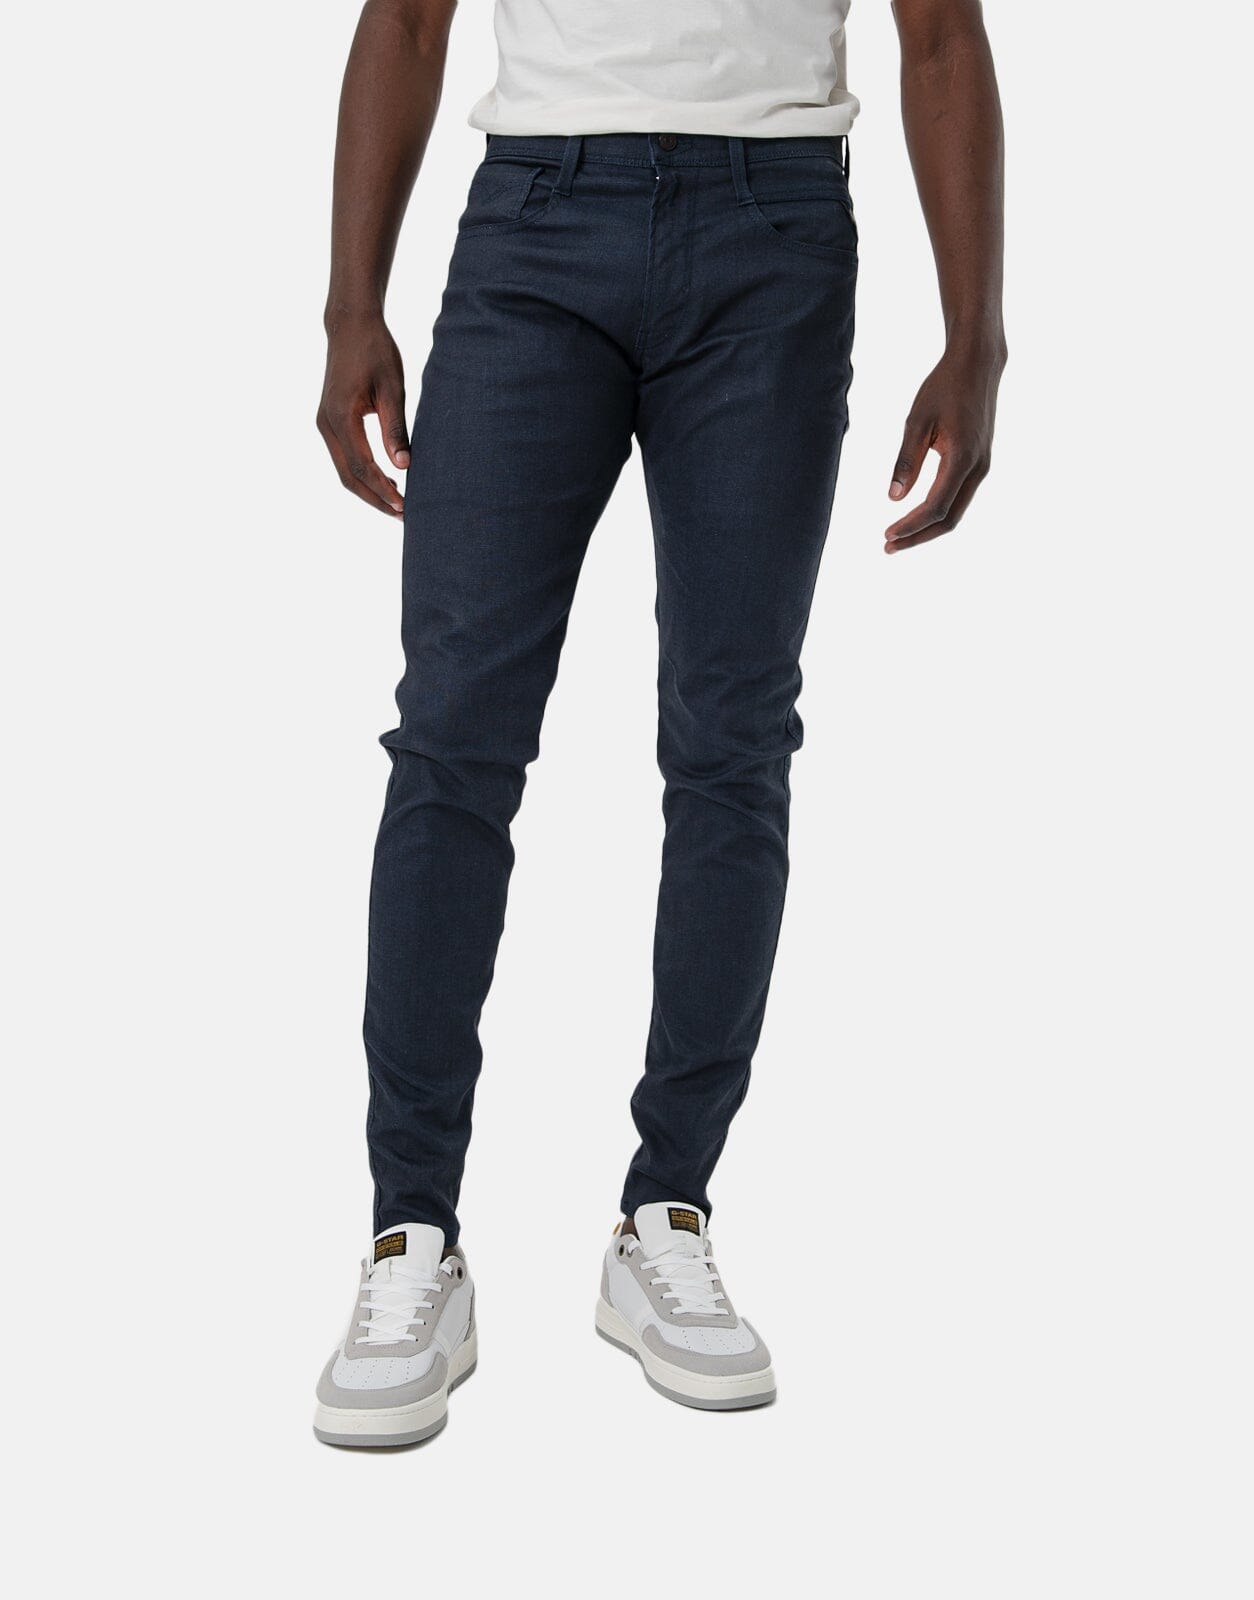 Replay Wax Coated Bronny Super Slim Fit Jeans - Subwear